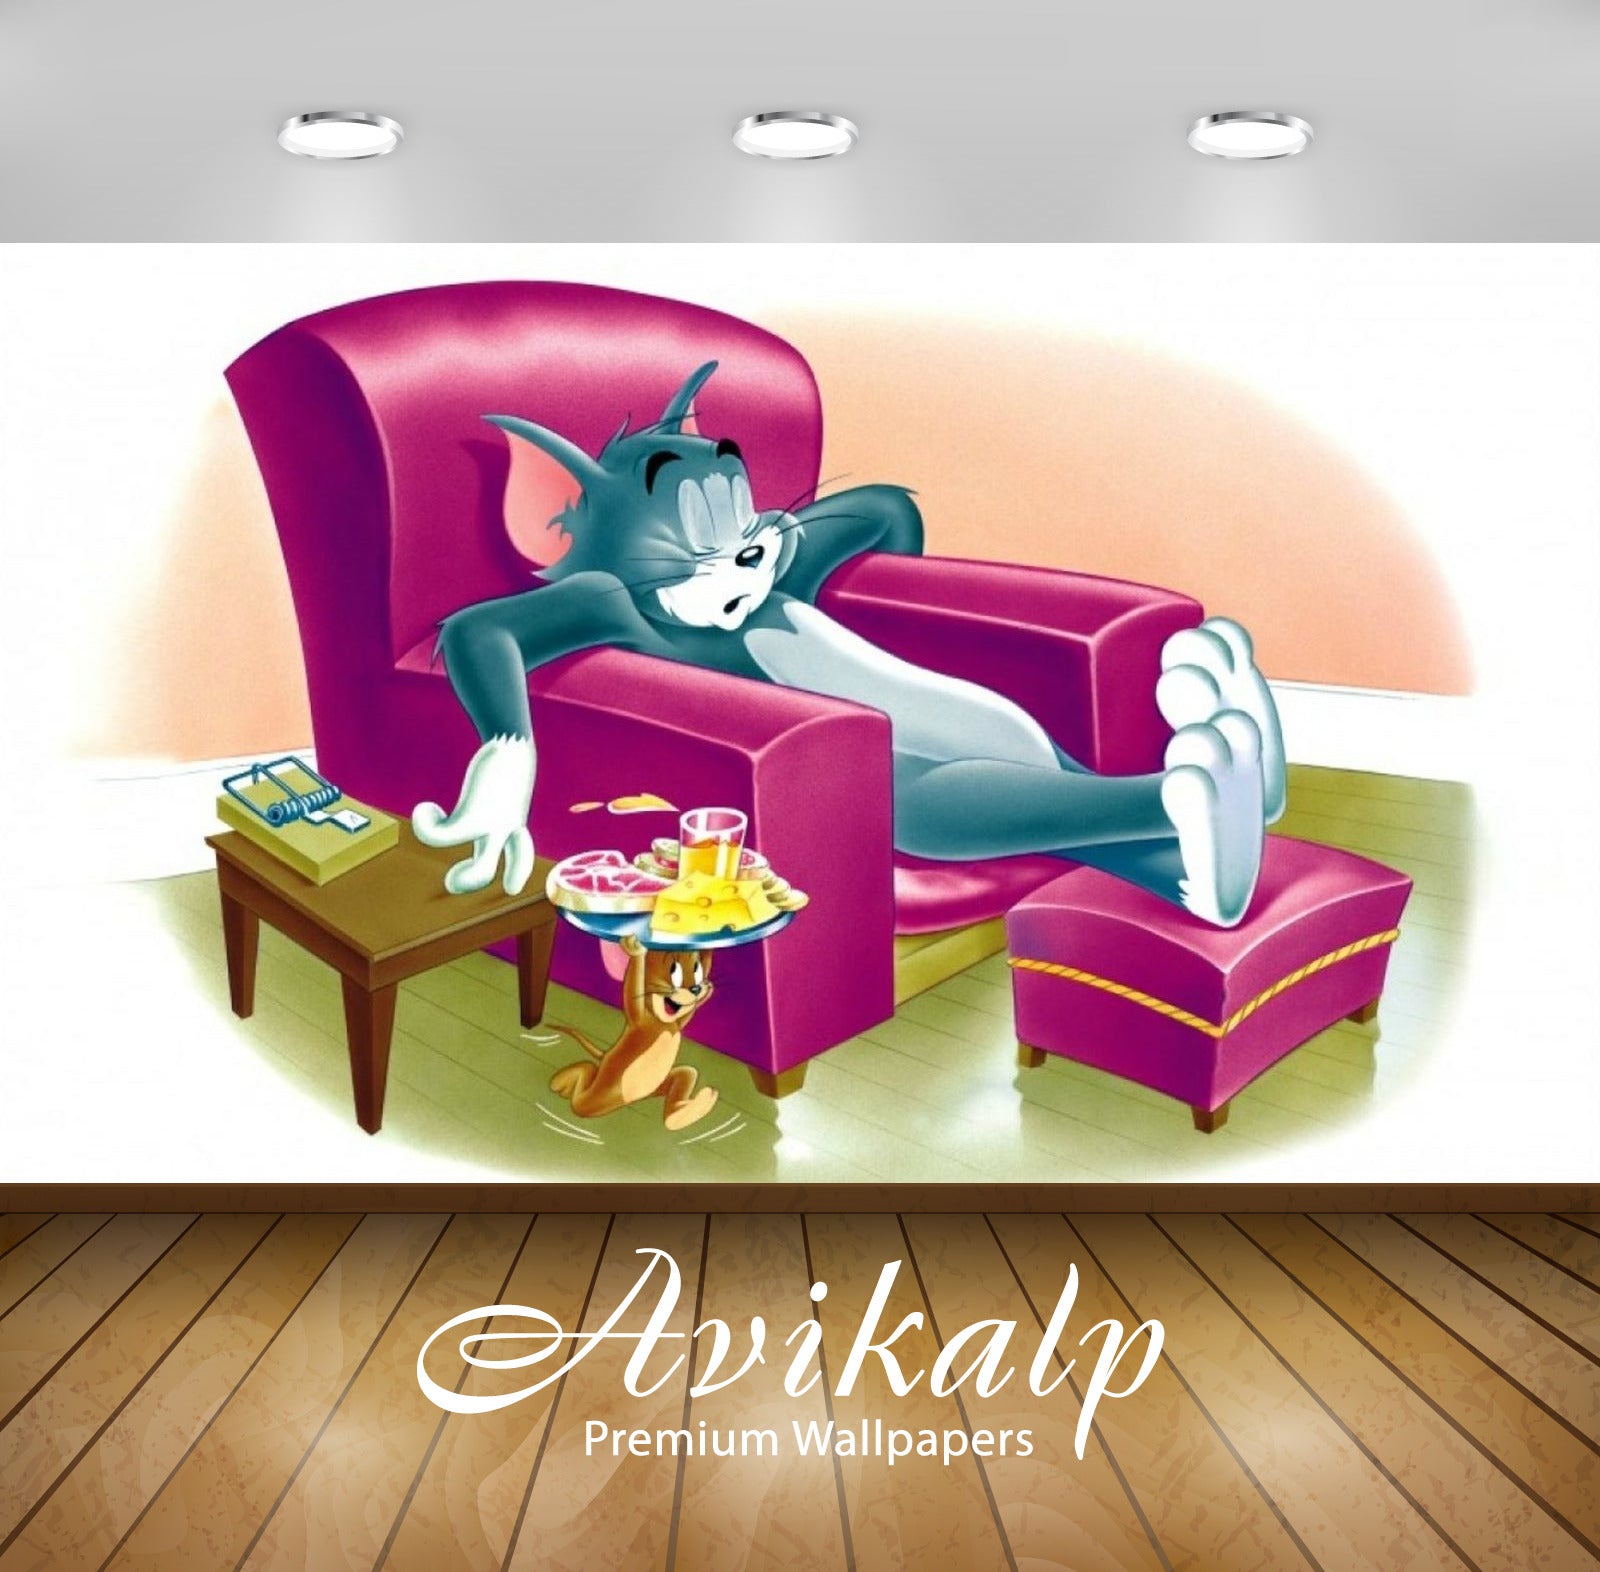 Avikalp Exclusive Awi2265 Tom And Jerry Full HD Wallpapers for Living room, Hall, Kids Room, Kitchen